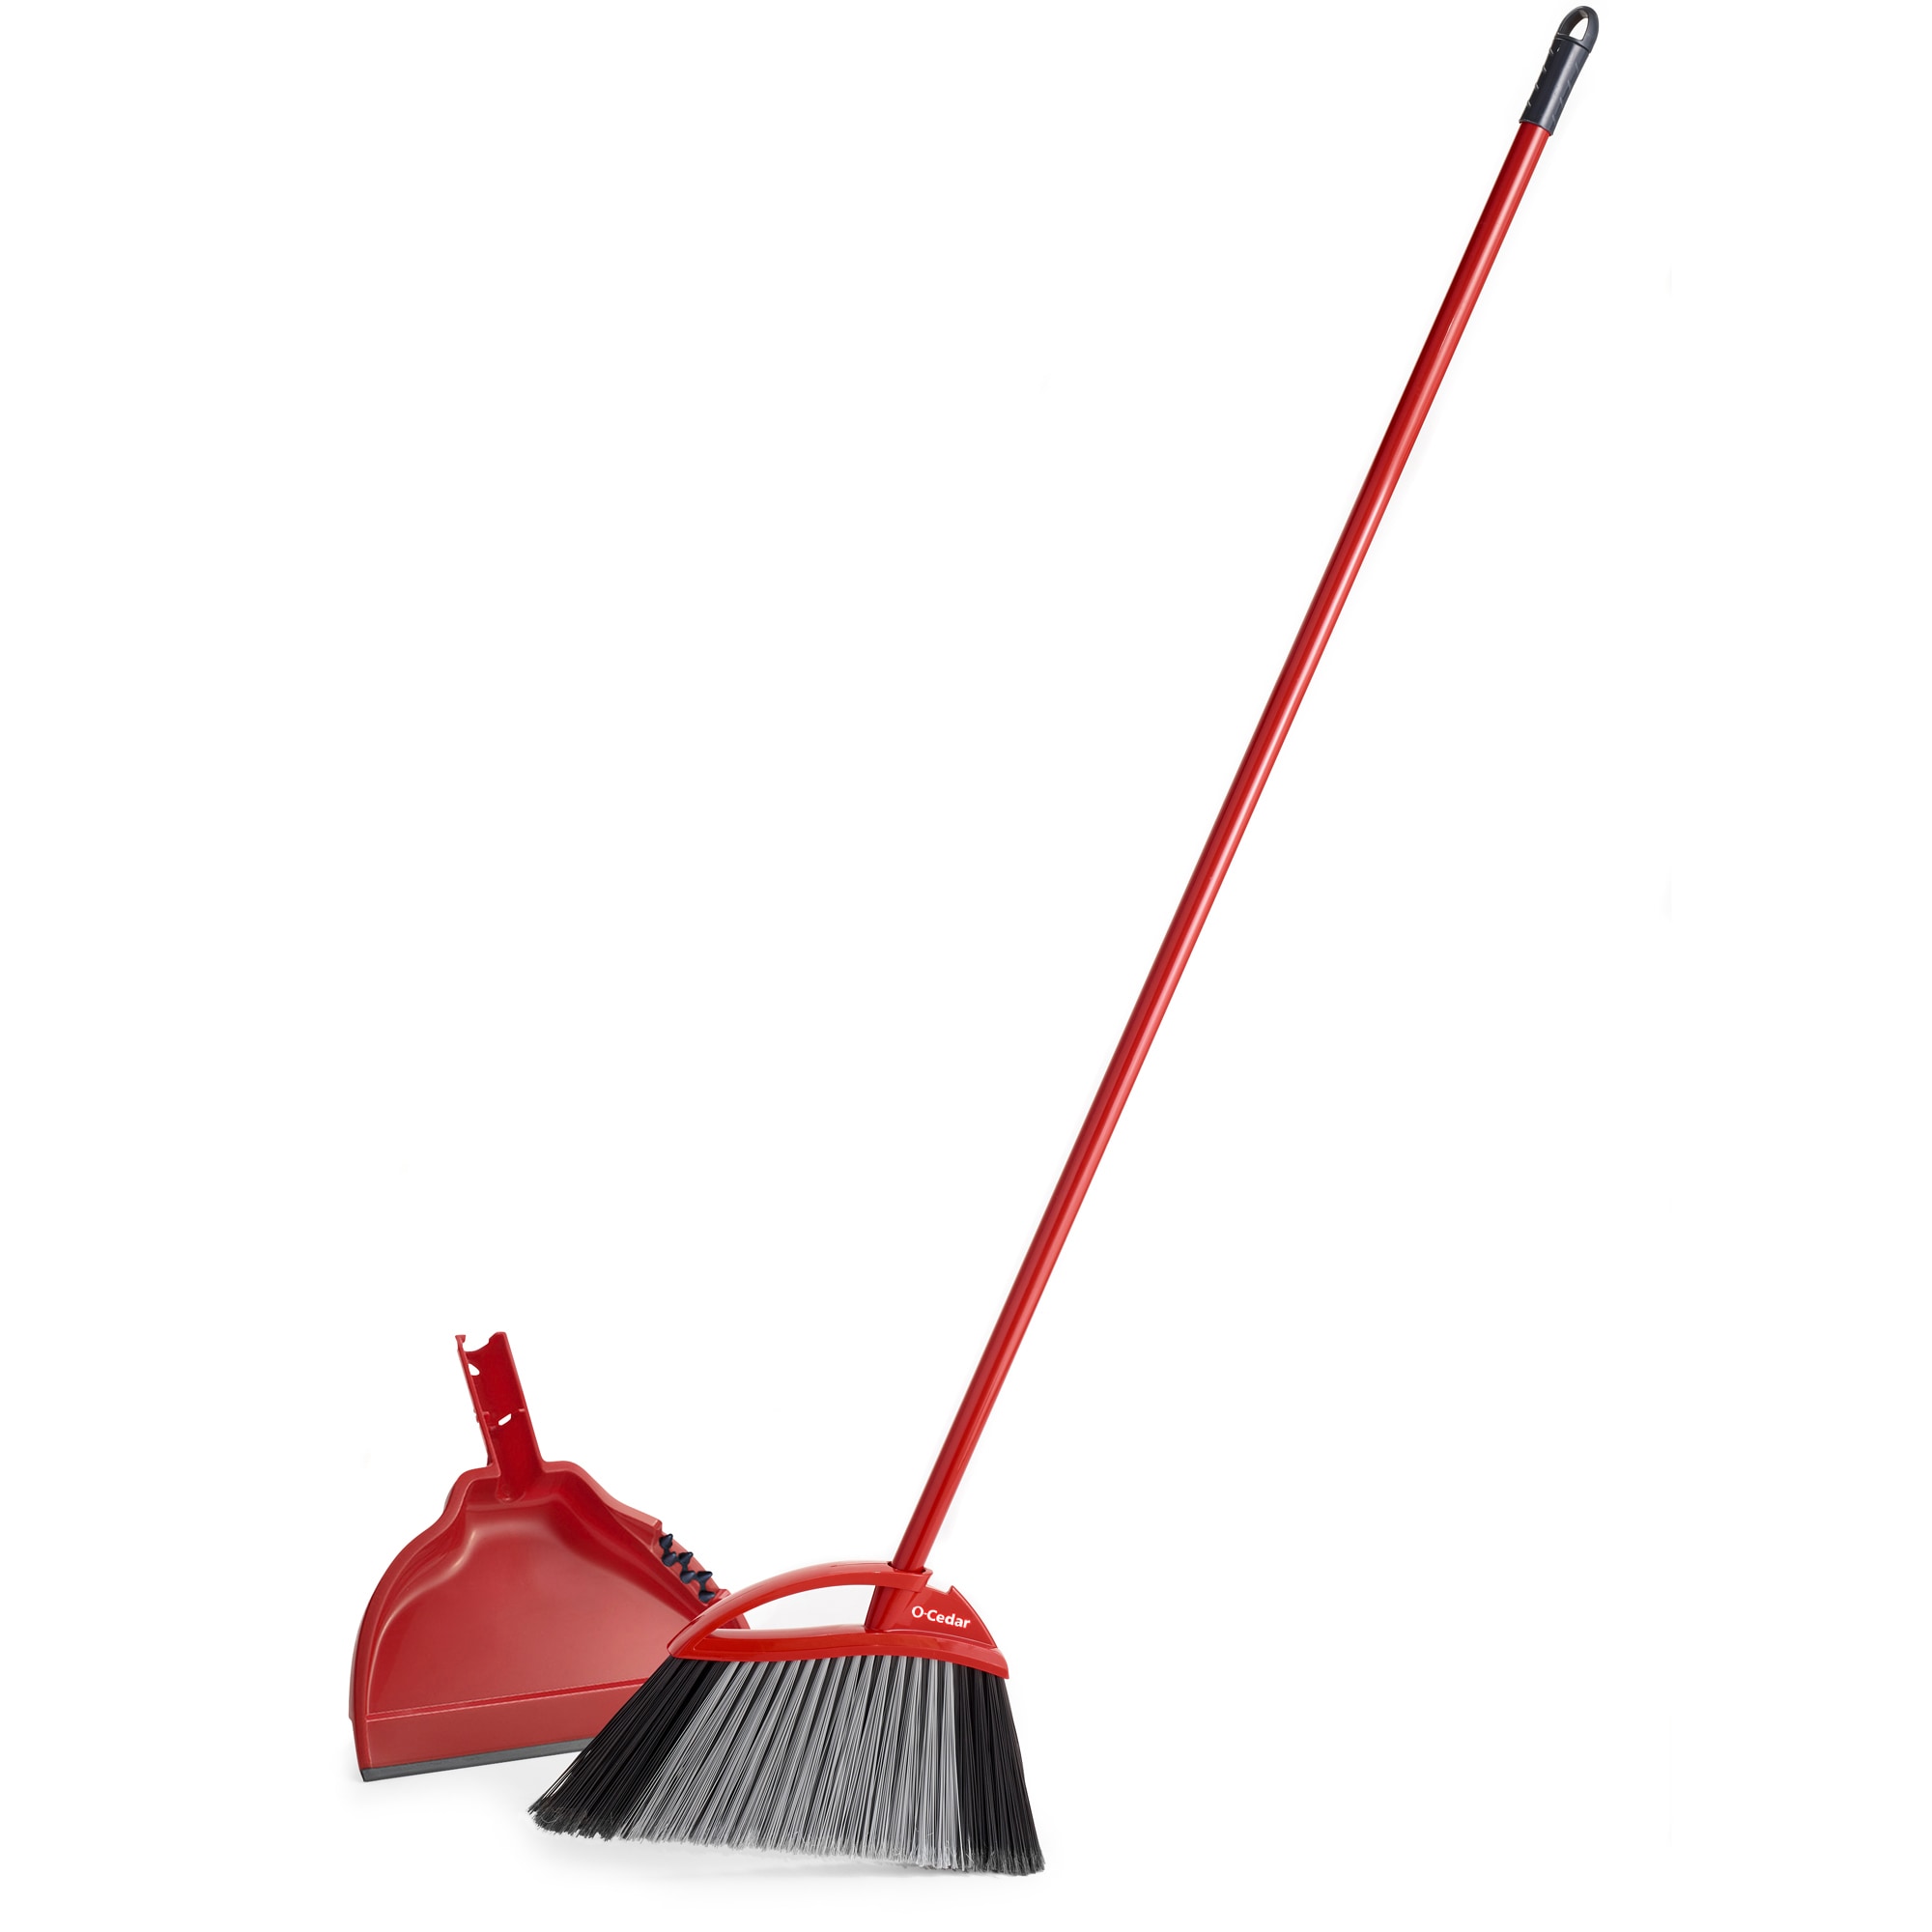 Broom and Dustpan Set - Strongest NO MORE TEARS 80% Heavier Duty - Upright  Standing Dust Pan with Extendable Broomstick for Easy Sweeping - Easy